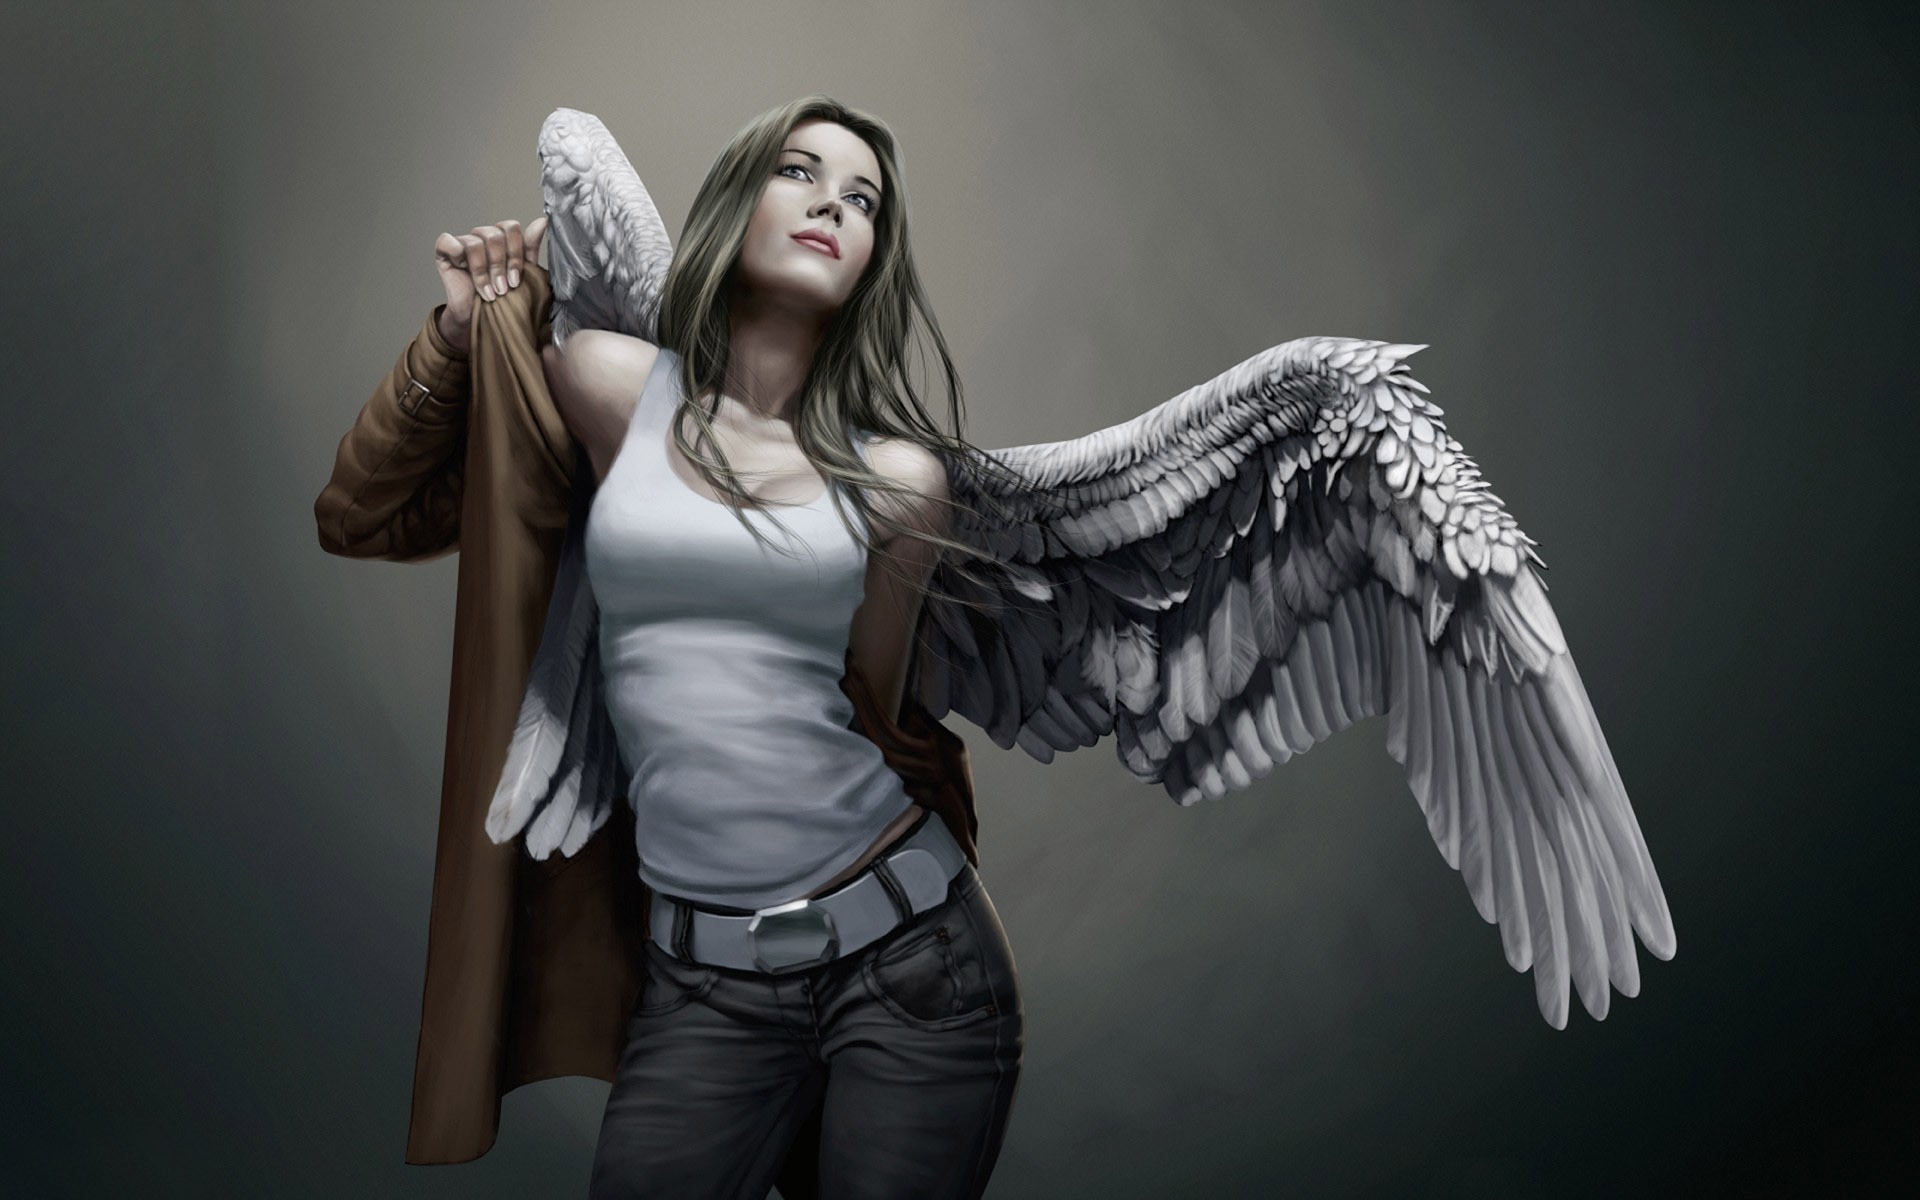 1920x1200 Angel, 3D, Photomanipulation, Photoshop Full HD wallpaper download to PC,  Mobile or Table PC. You can also set as Facebook Cover